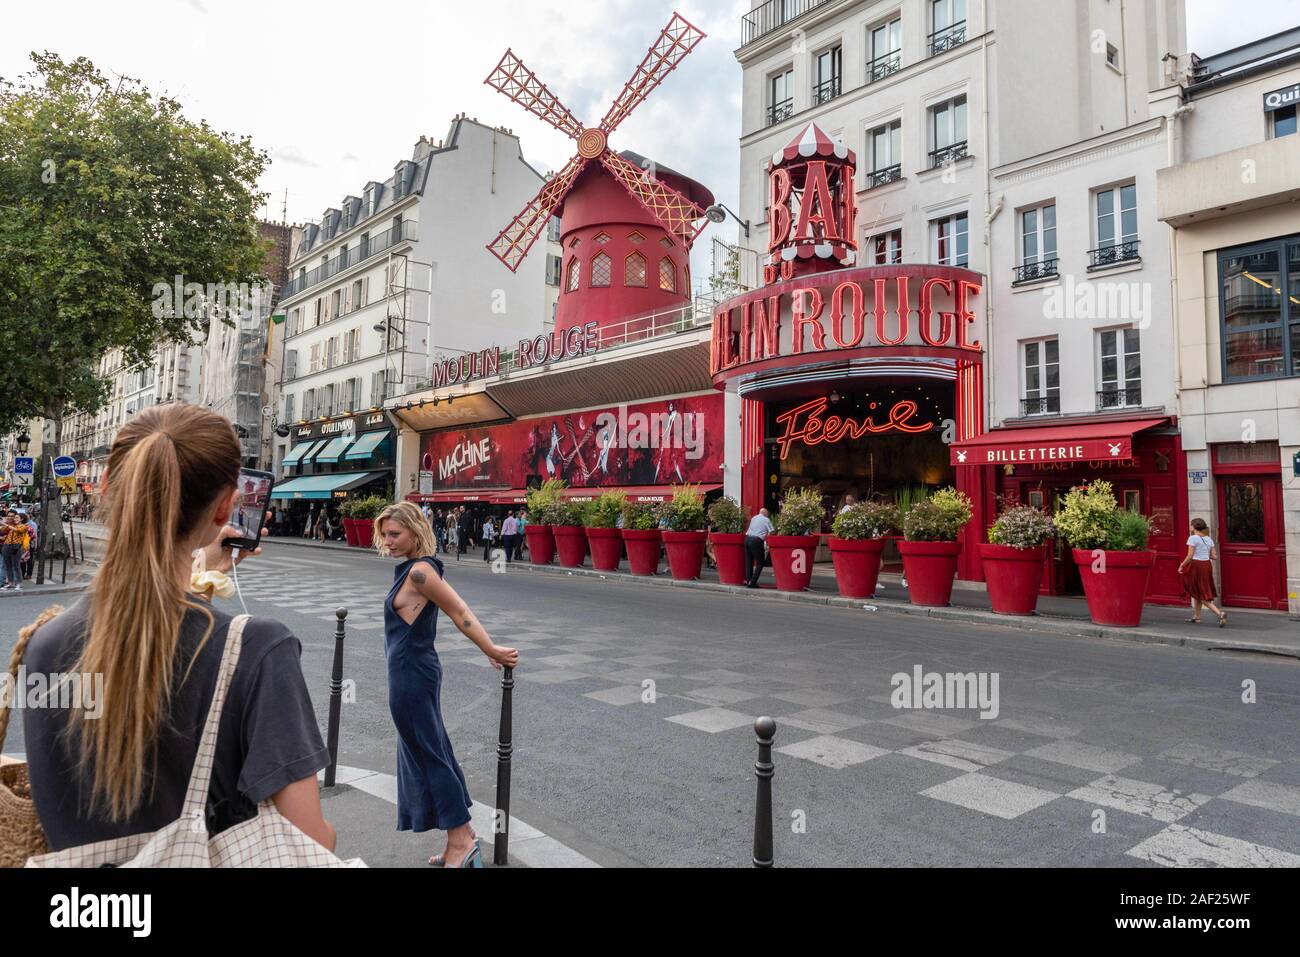 Paris (France): atmosphere in the district of Montmartre, tourists taking pictures in front of the Moulin Rouge cabaret. Stock Photo